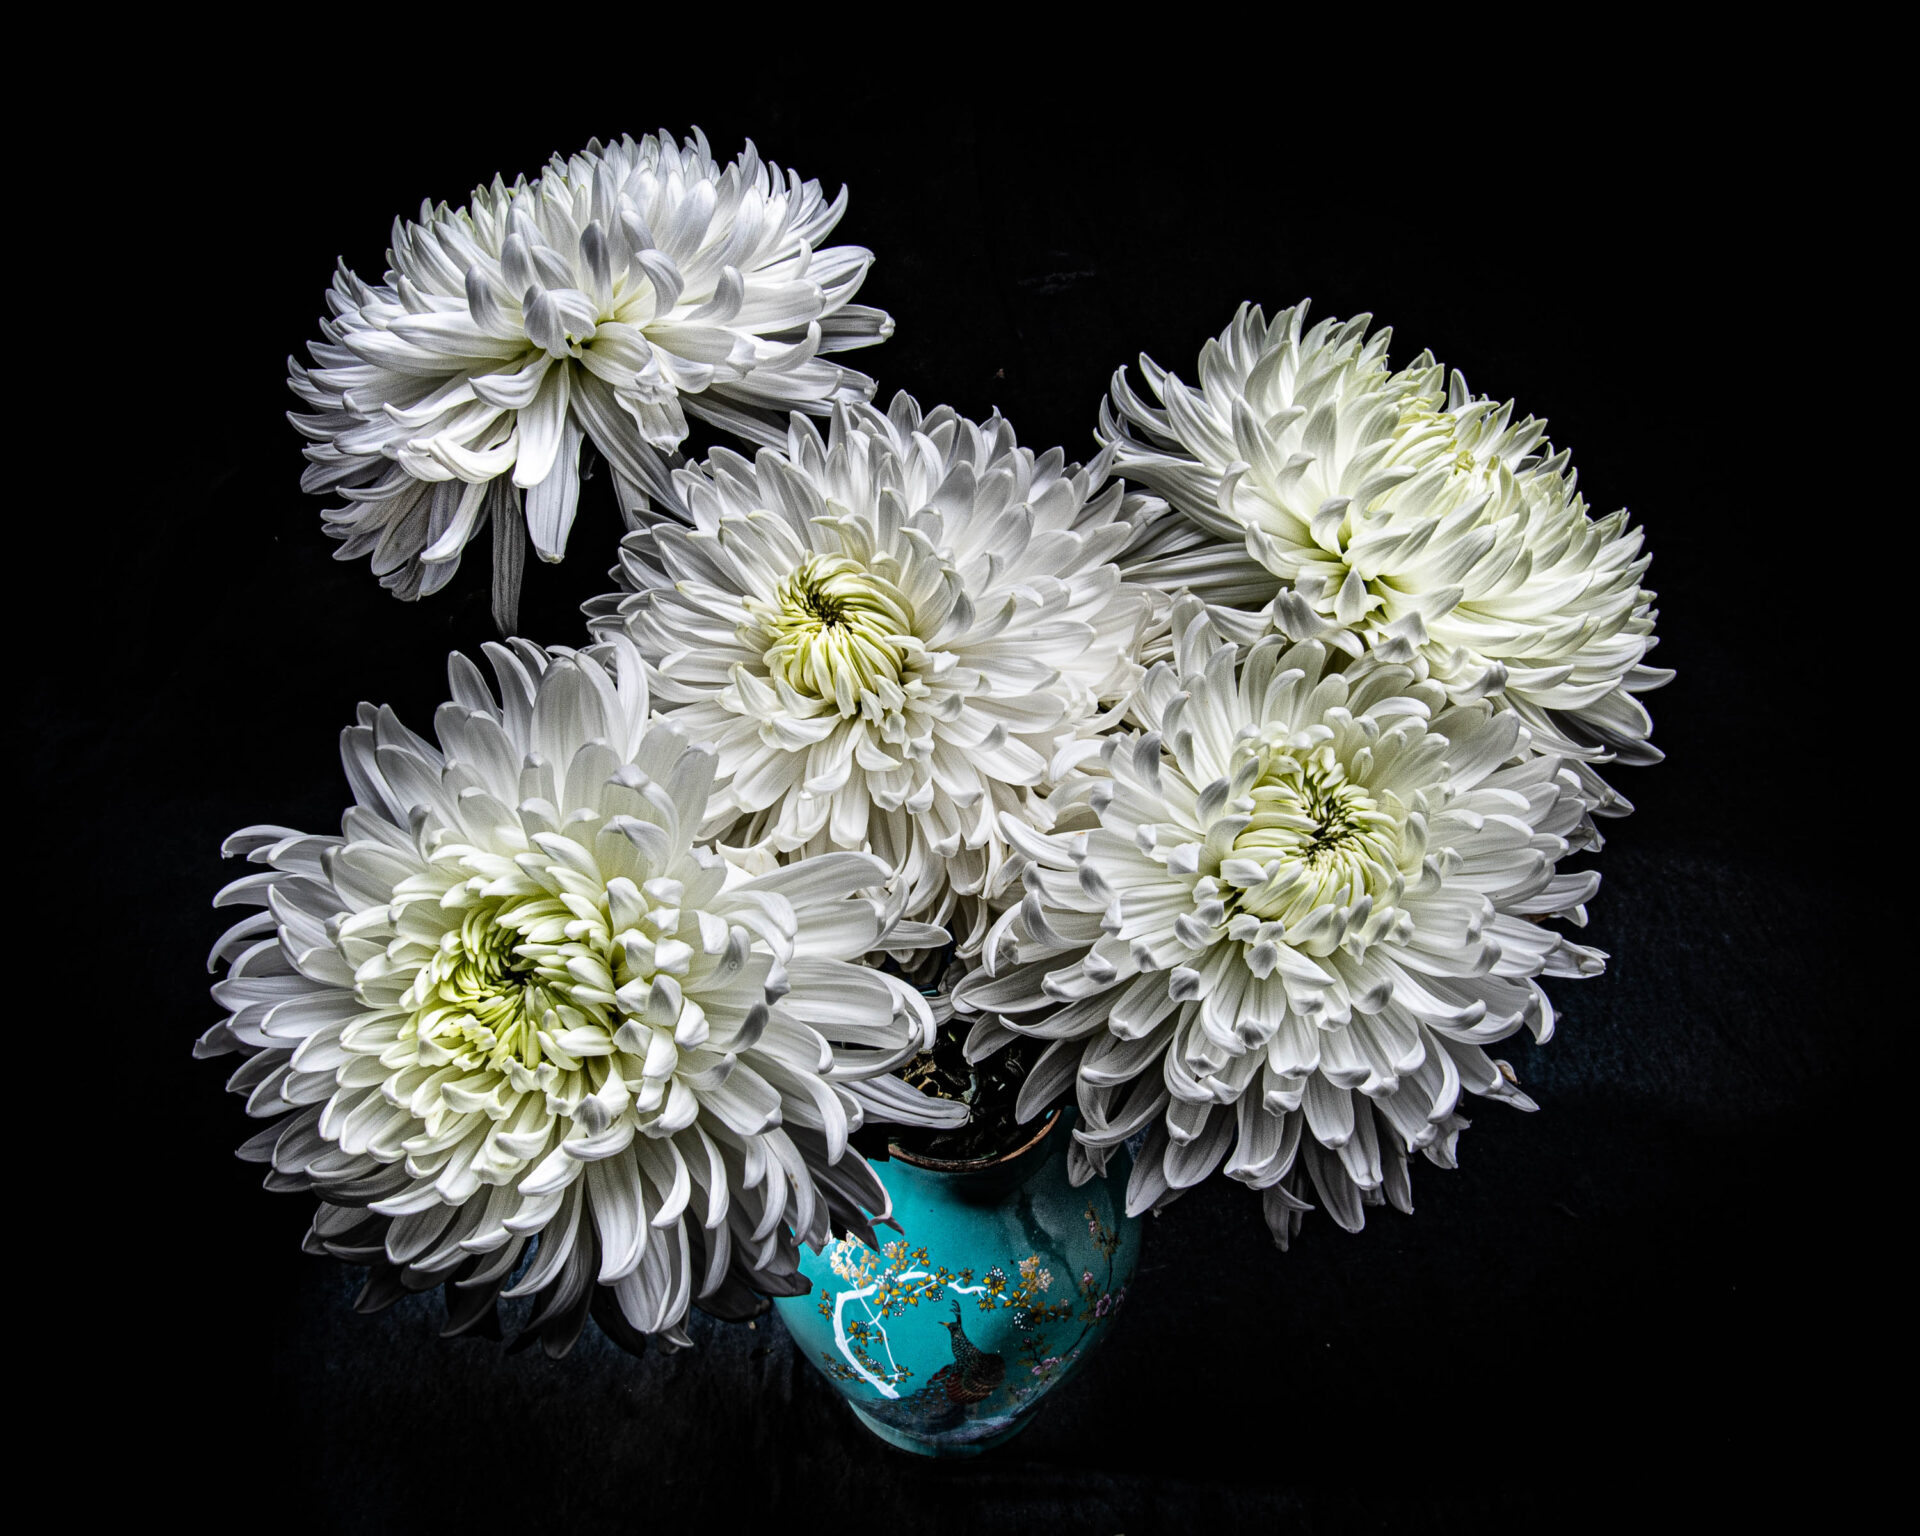 Photograph of a group of white chrysantemums in a teal blue vase decorated with a peacock.